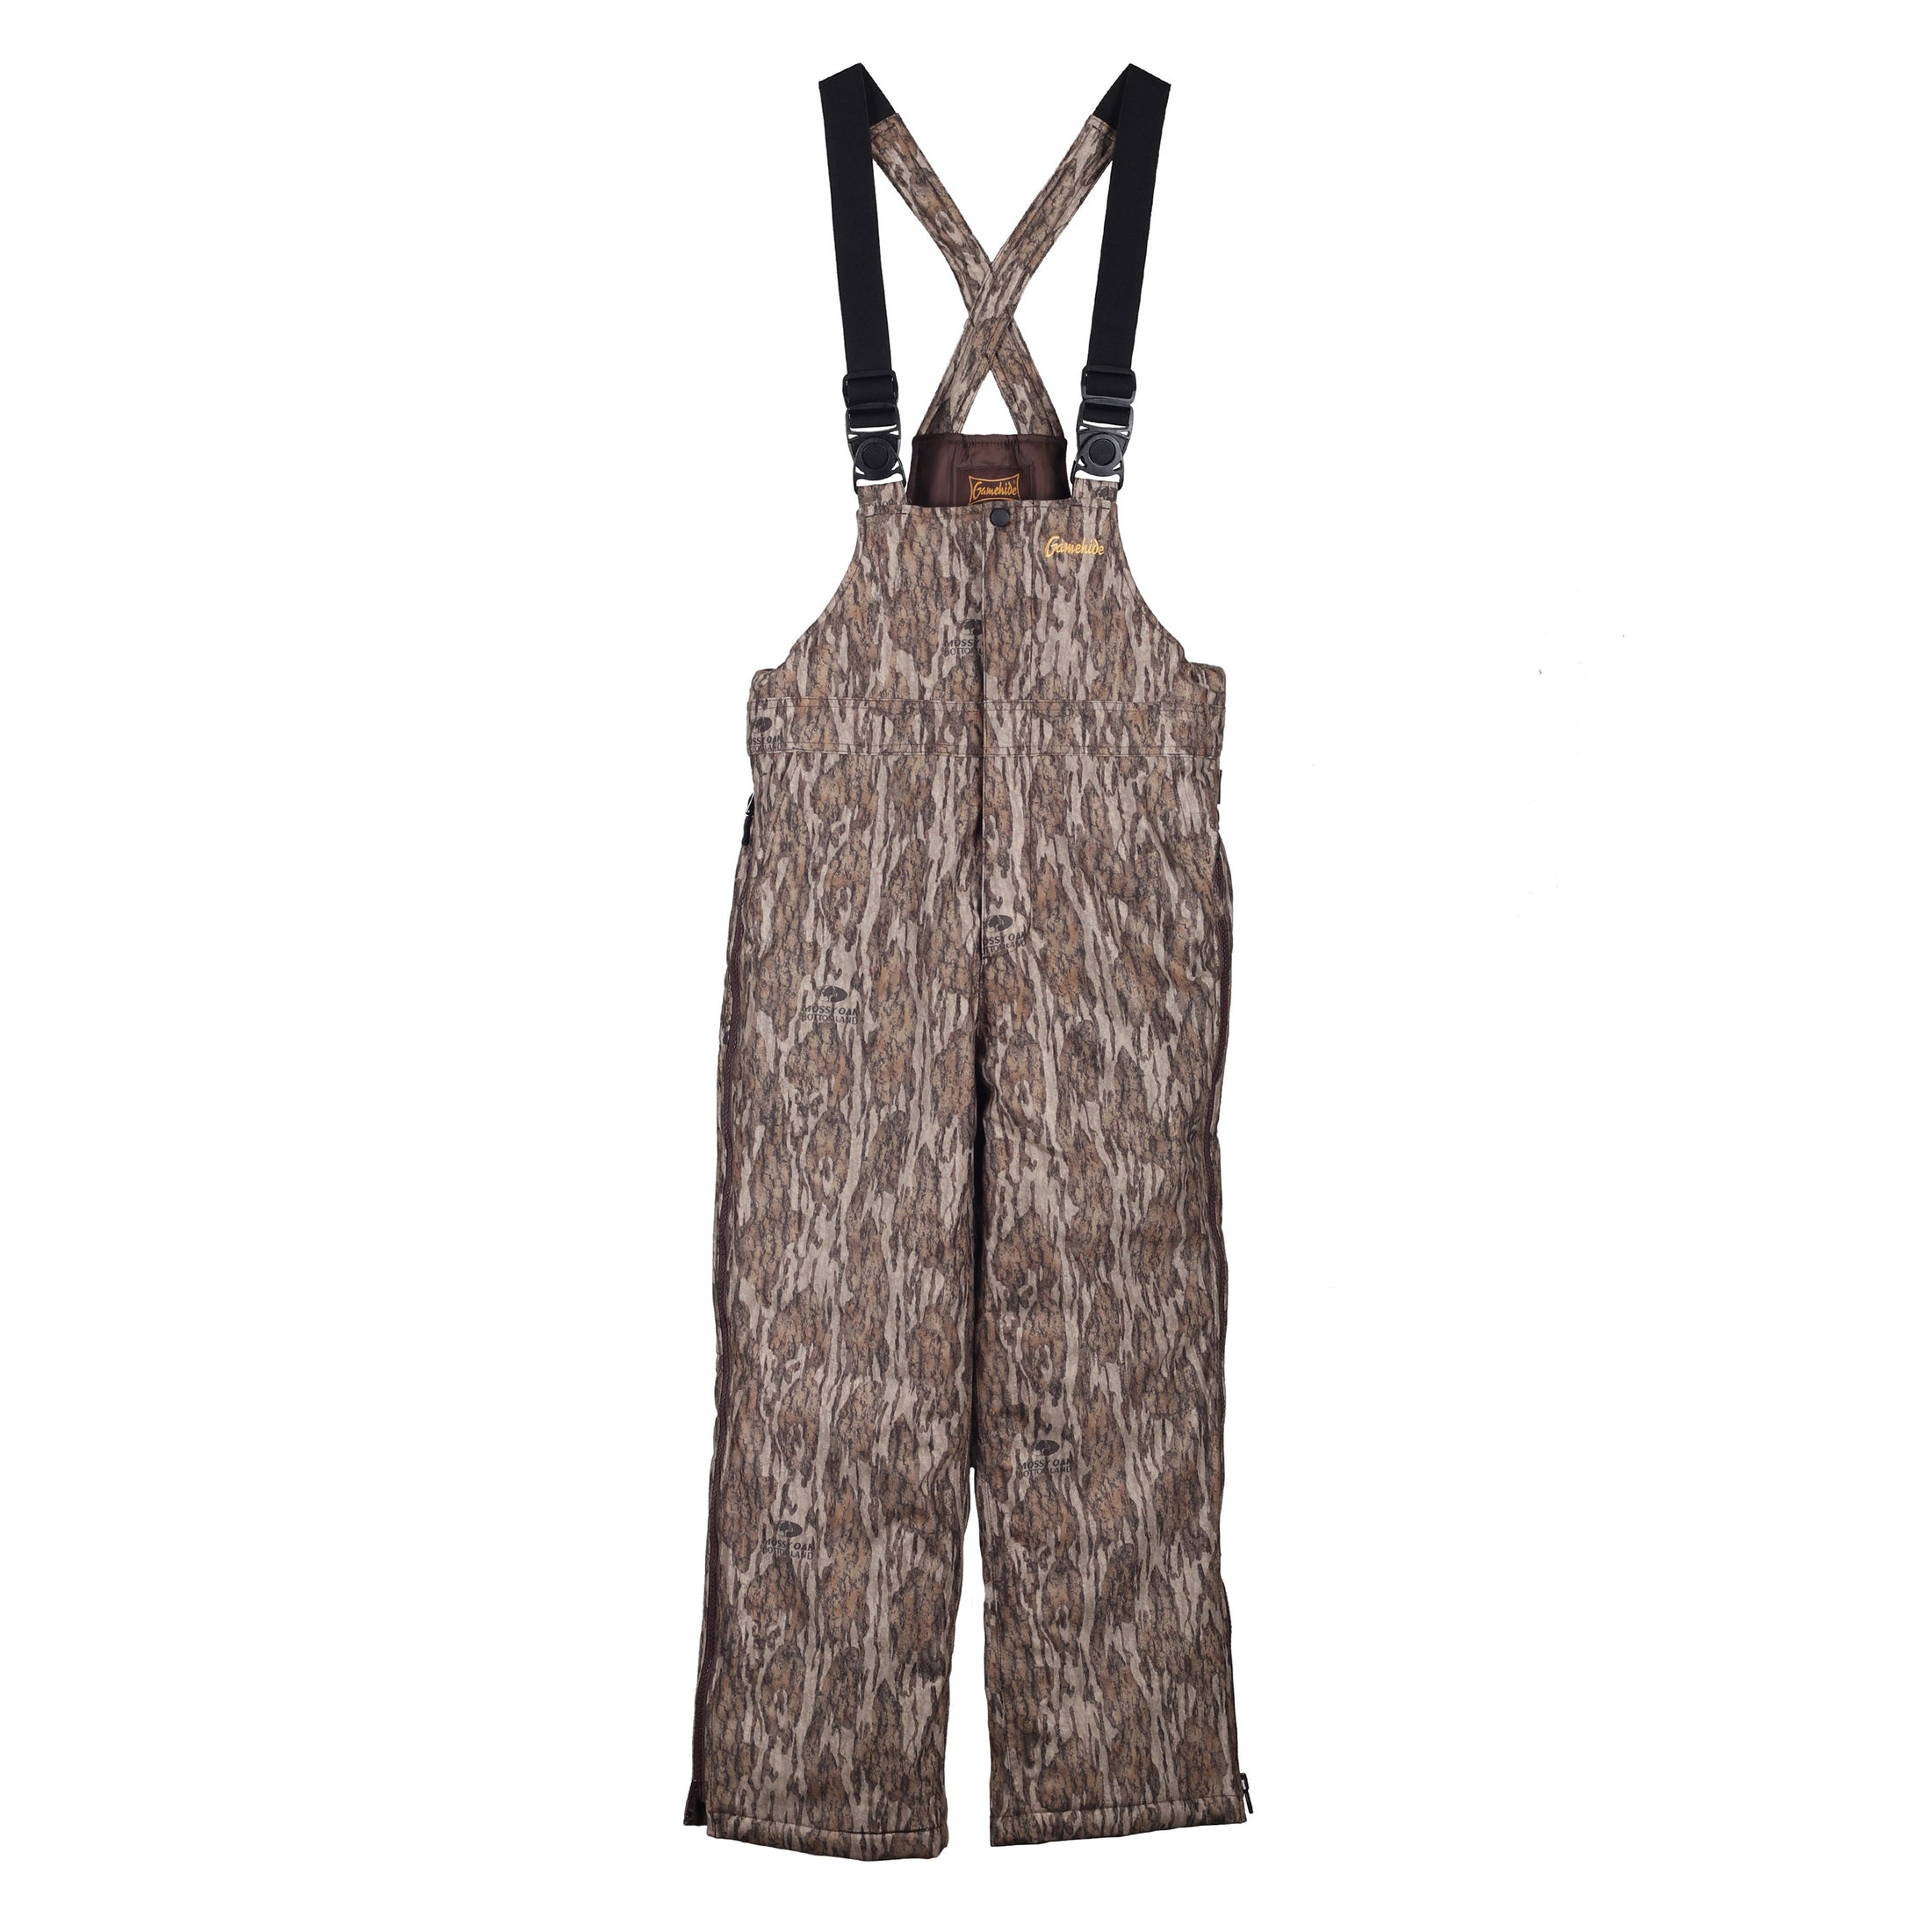 Gamehide Youth Tundra Bibs front view (mossy oak new bottomland).